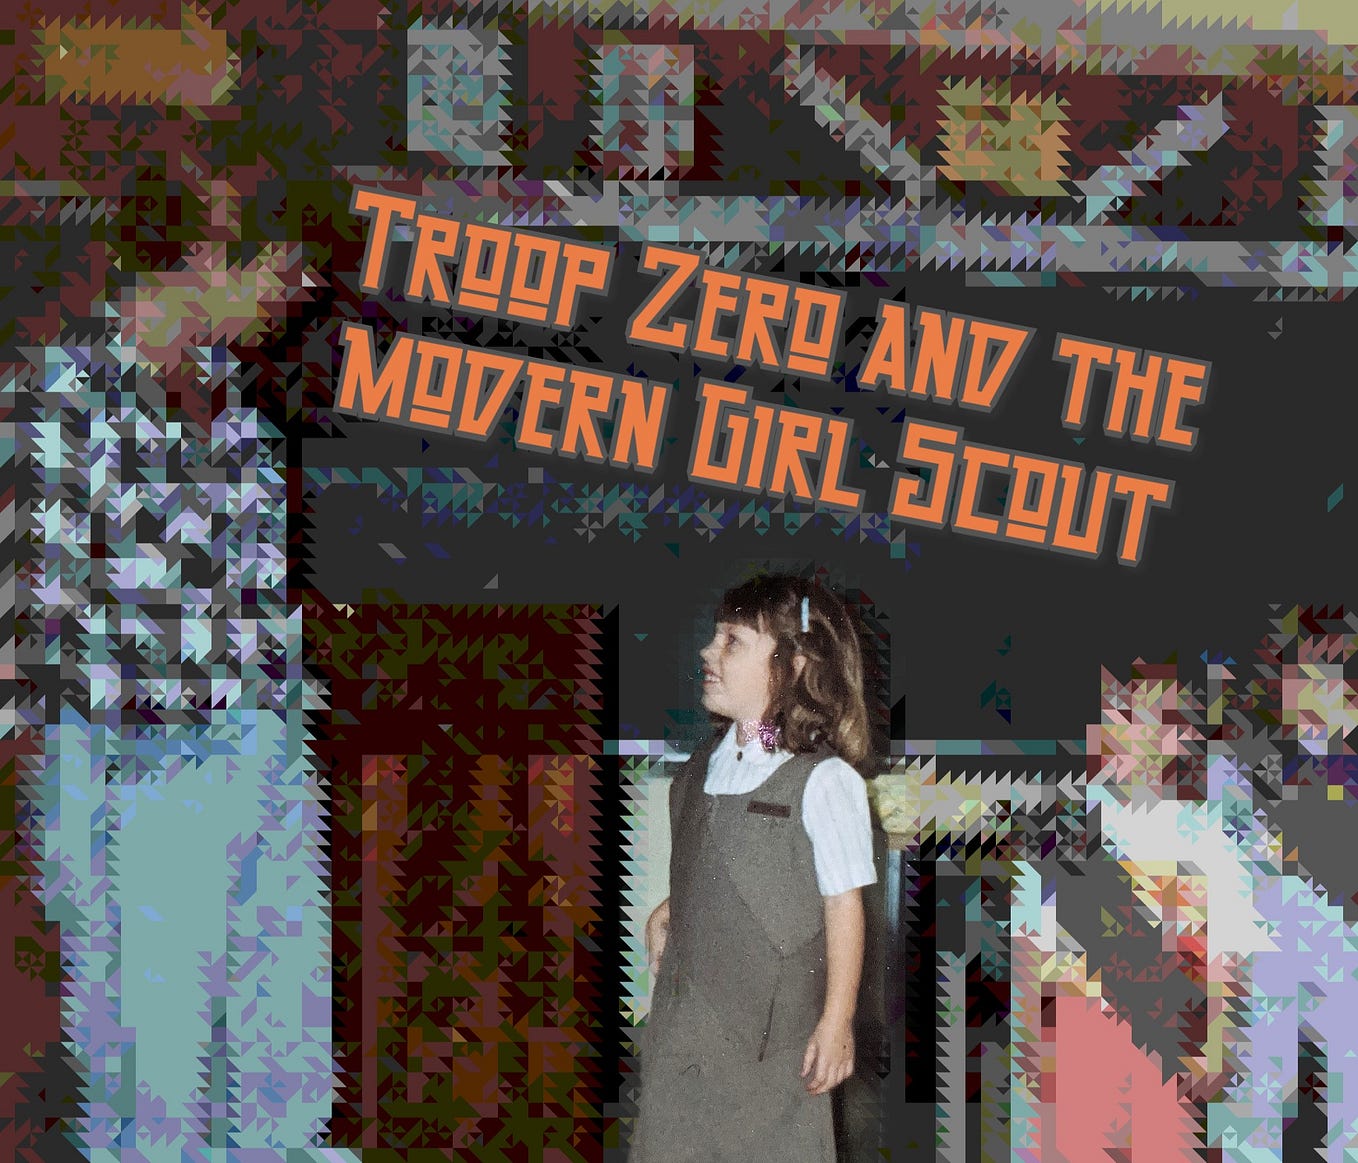 Troop Zero and the modern Girl Scout